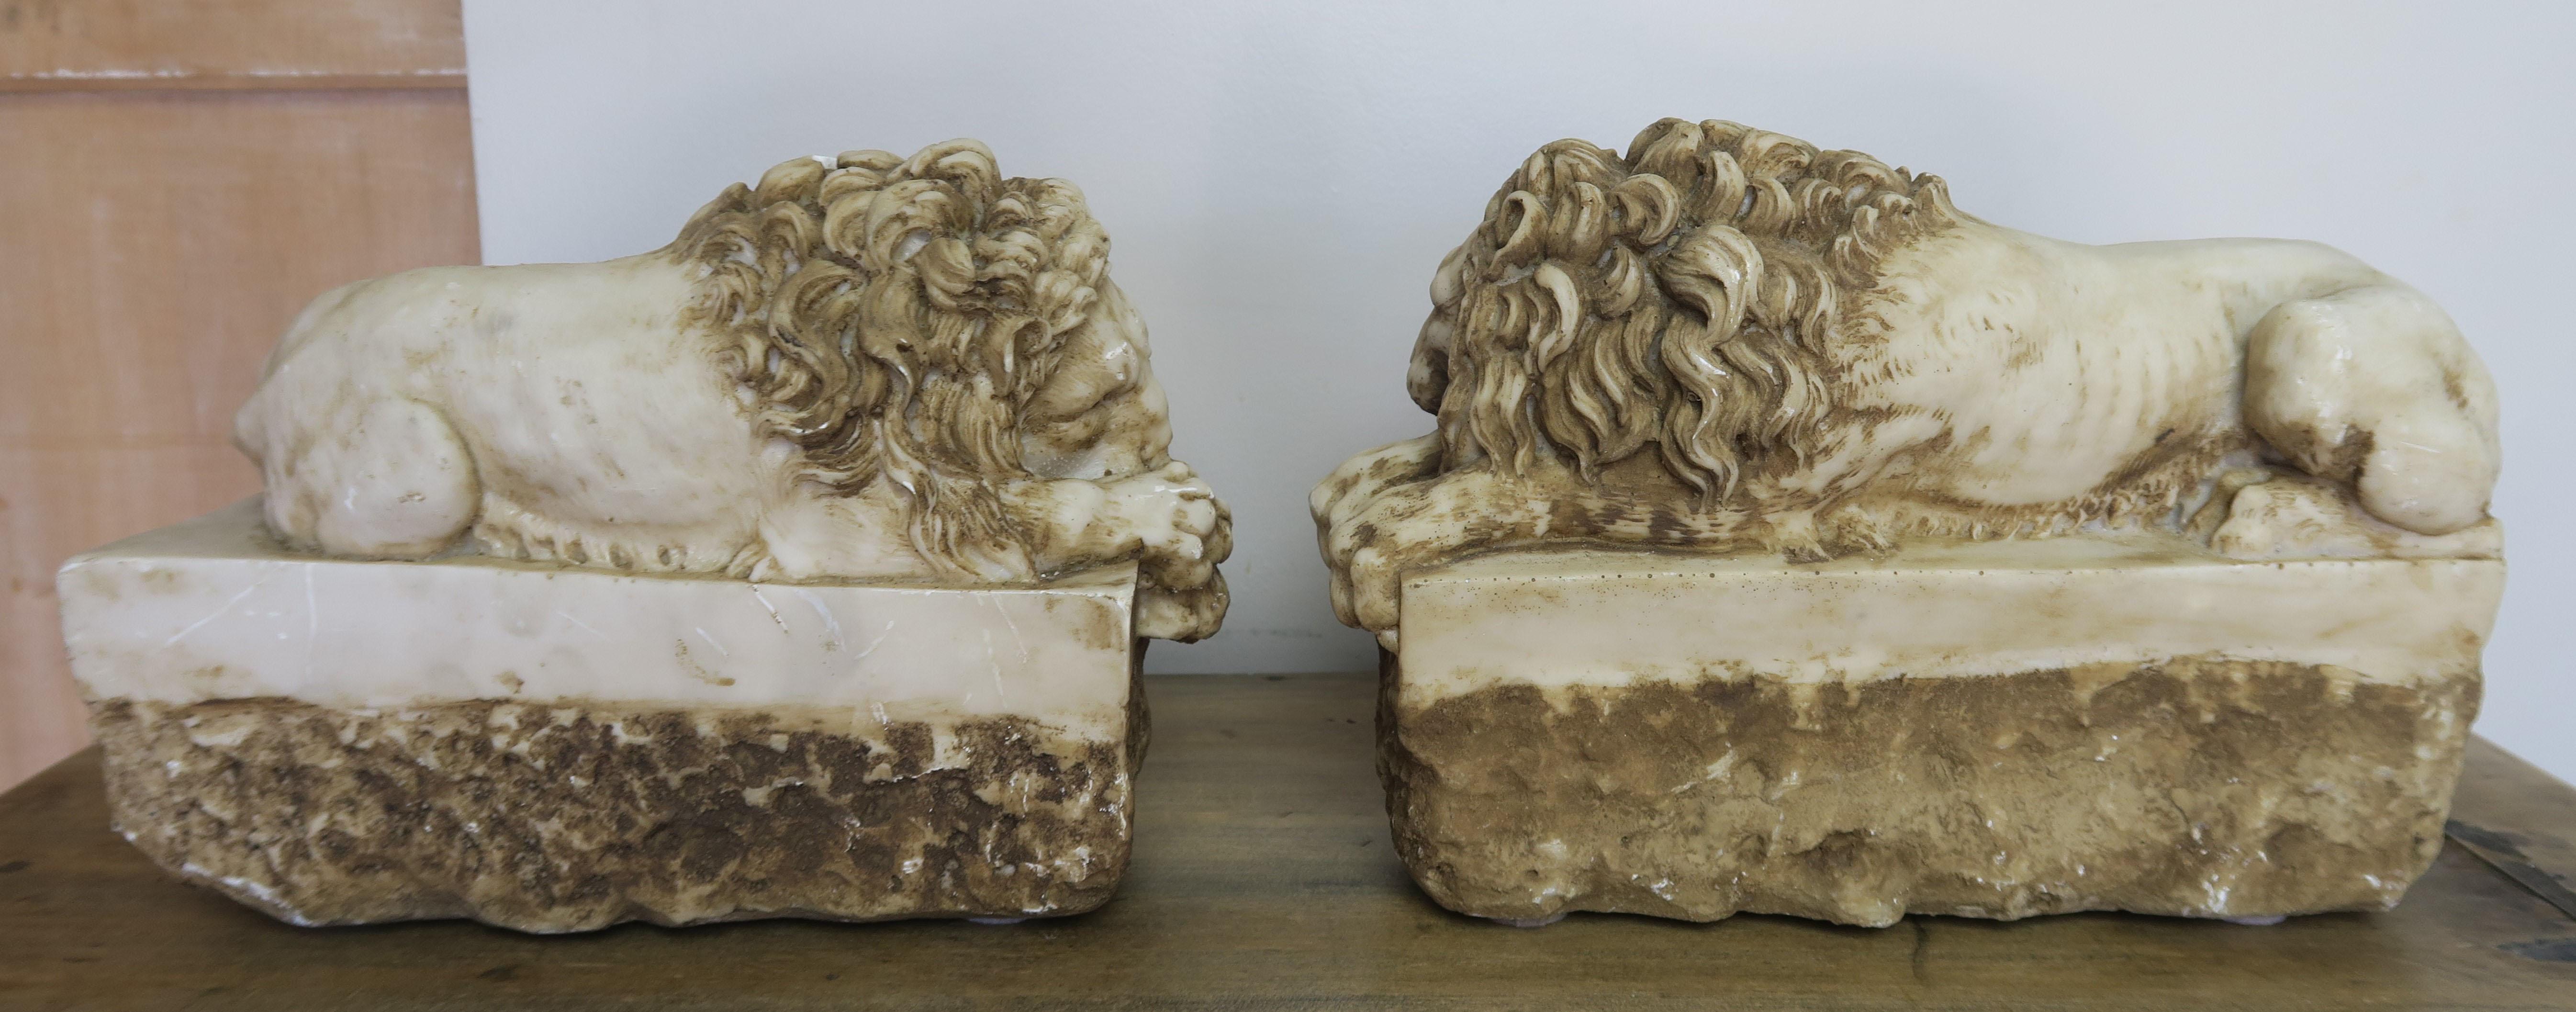 A pair of replica stone lions that were originally created by Antonio Canova (1757-1822). The renowned Italian artist, created the originals of these lions as a part of the monumental tomb for Clement XIII, in 1792 at St. Peter’s Basilica in Rome.